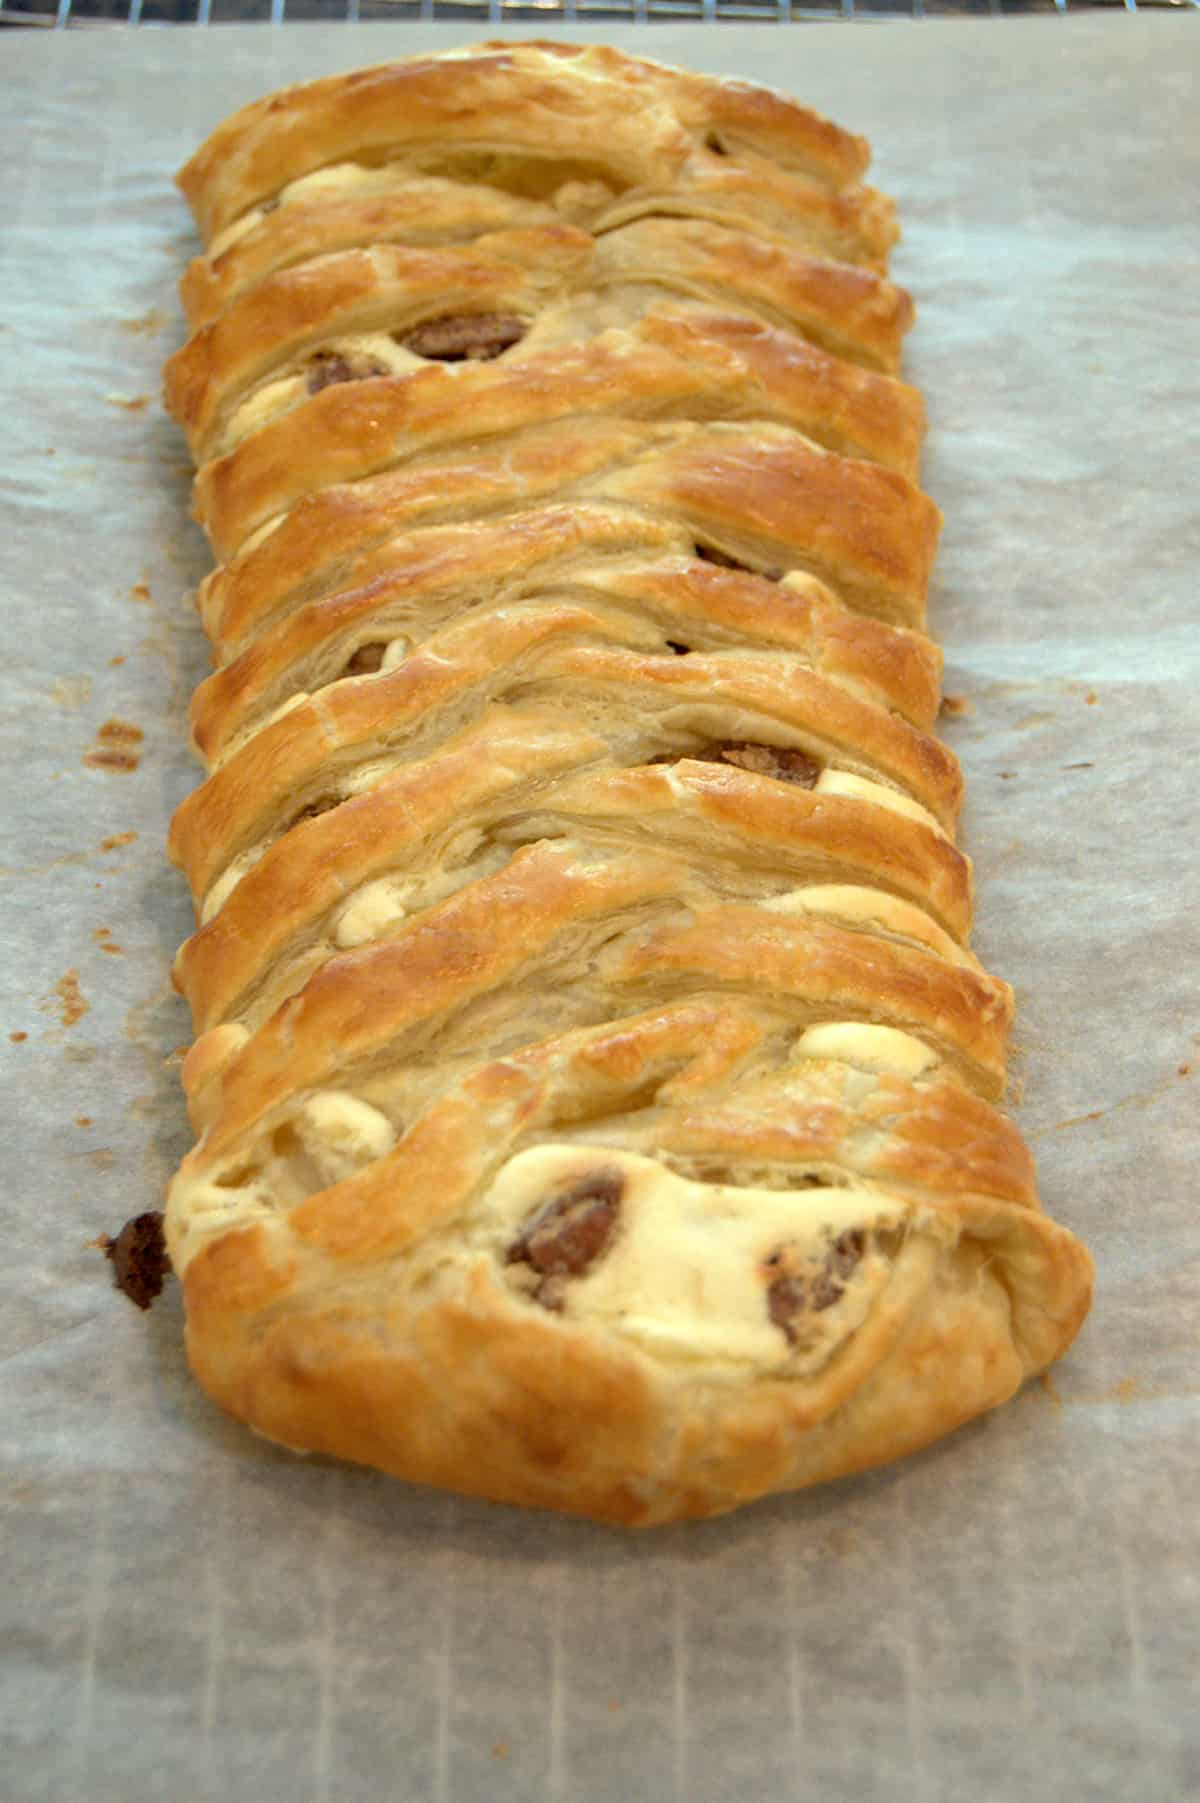 Finished cheese braid cooling on parchment paper.